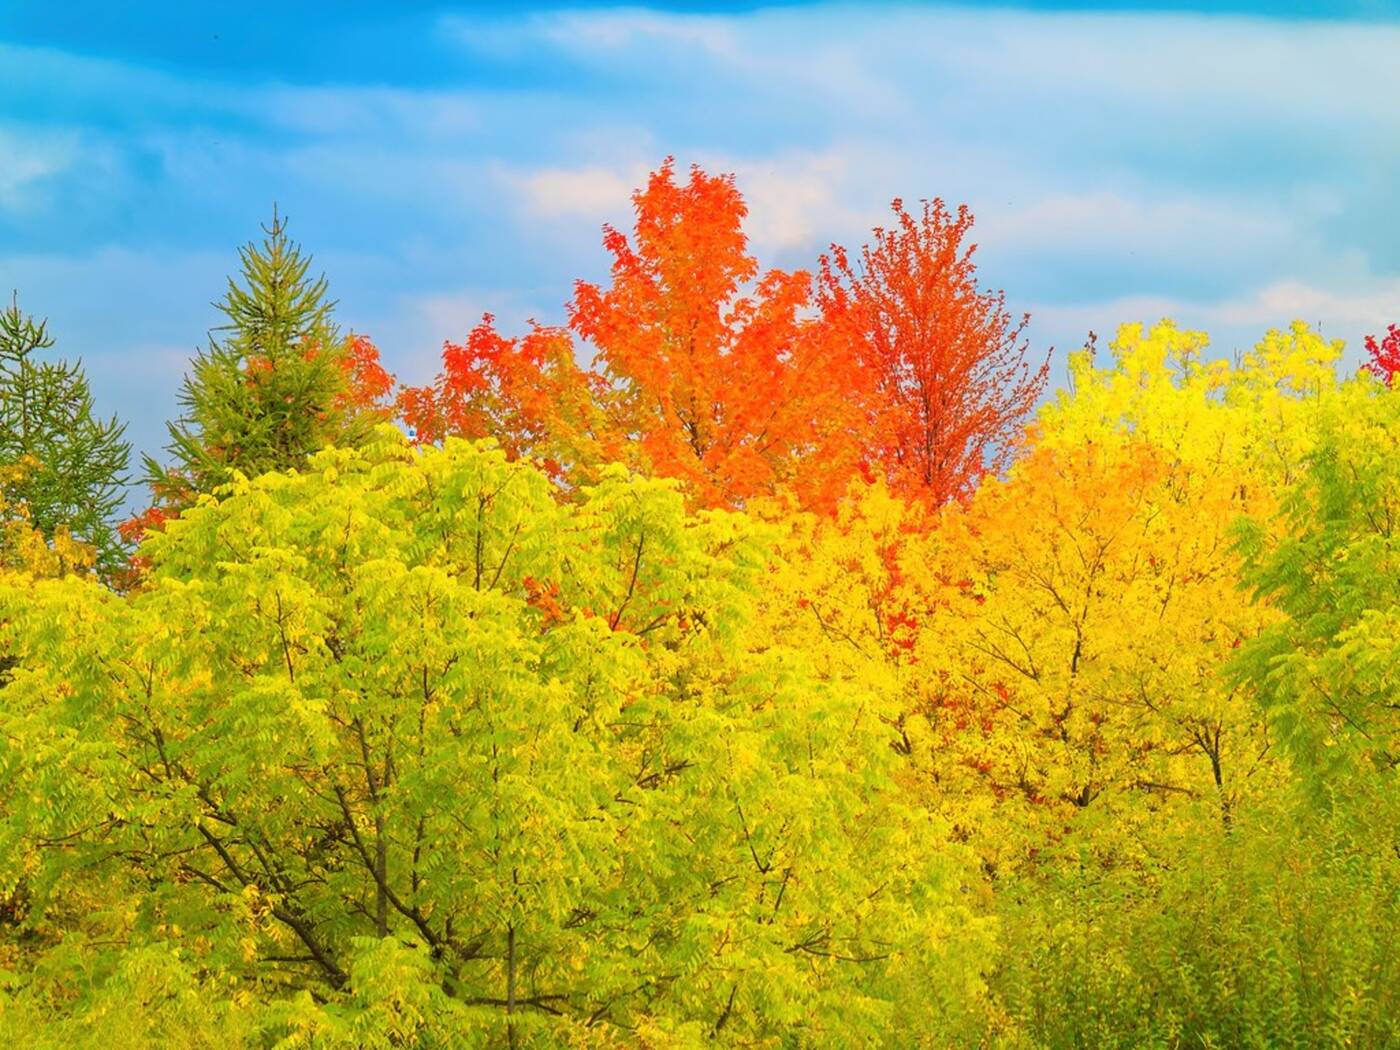 Events in toronto: This is what fall colours look like in Toronto right now